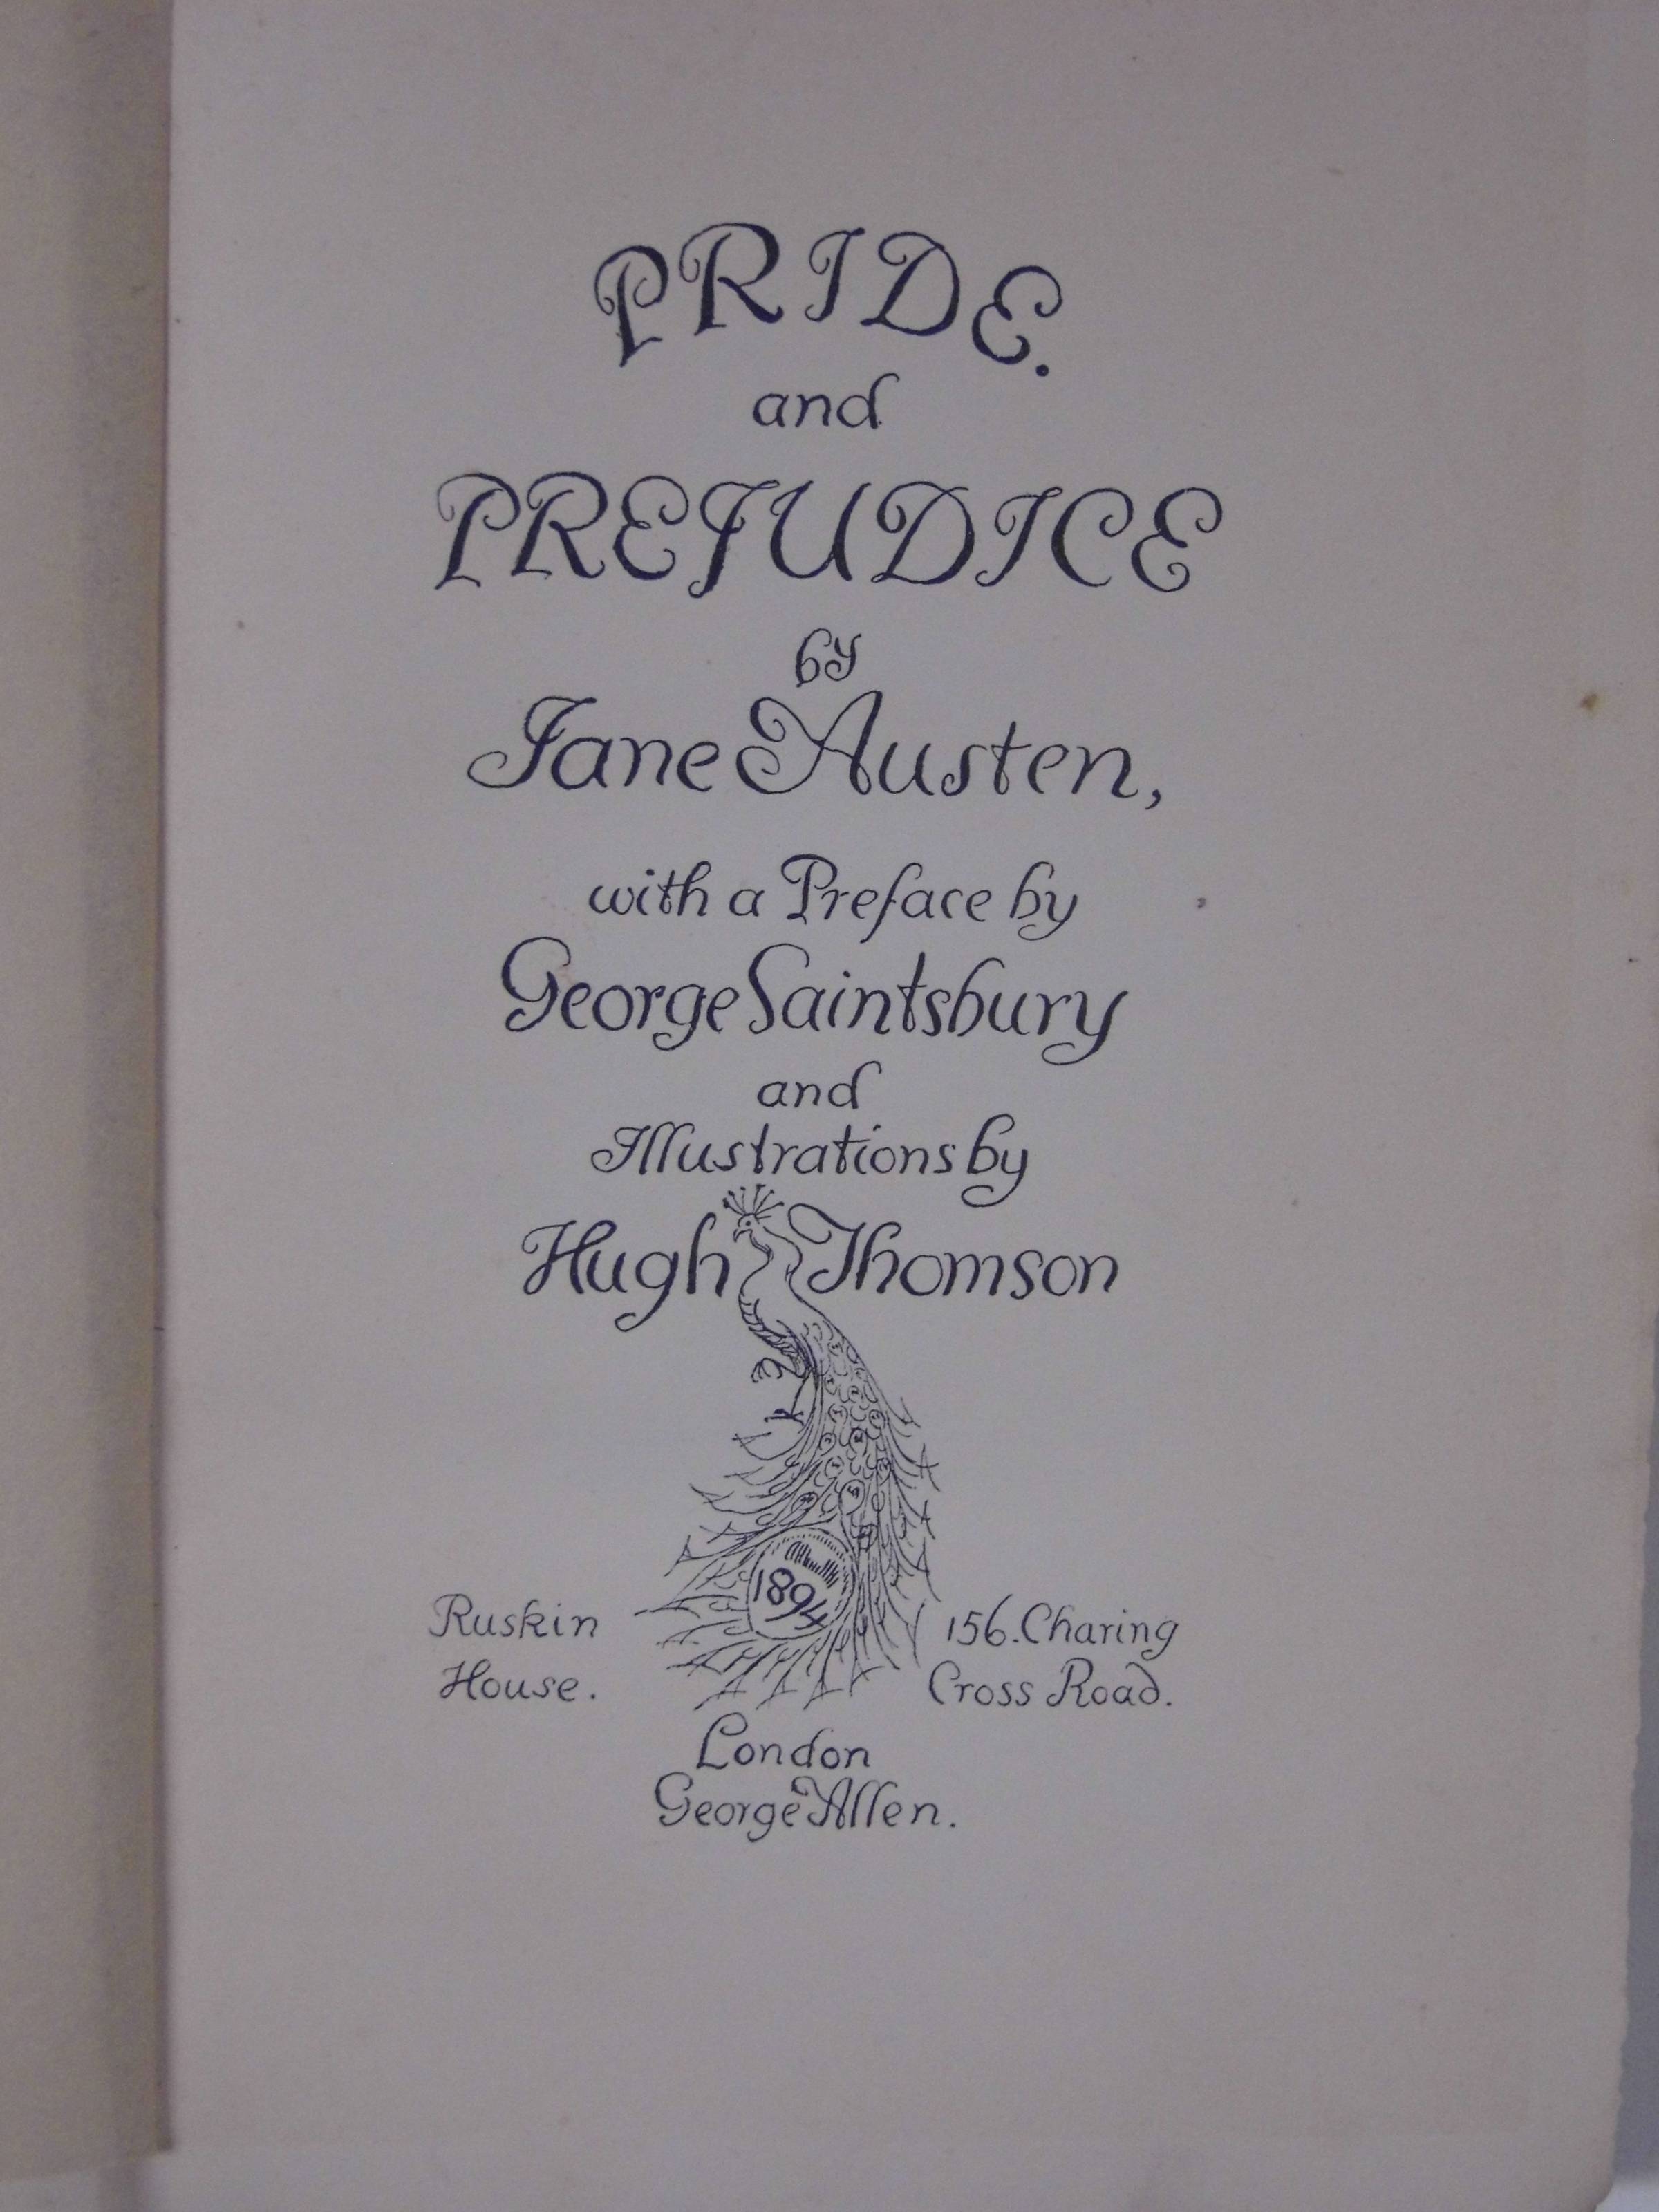 Austen (Jane). Pride and Prejudice, with a Preface by George Saintsbury and Illustrations by Hugh - Image 5 of 5